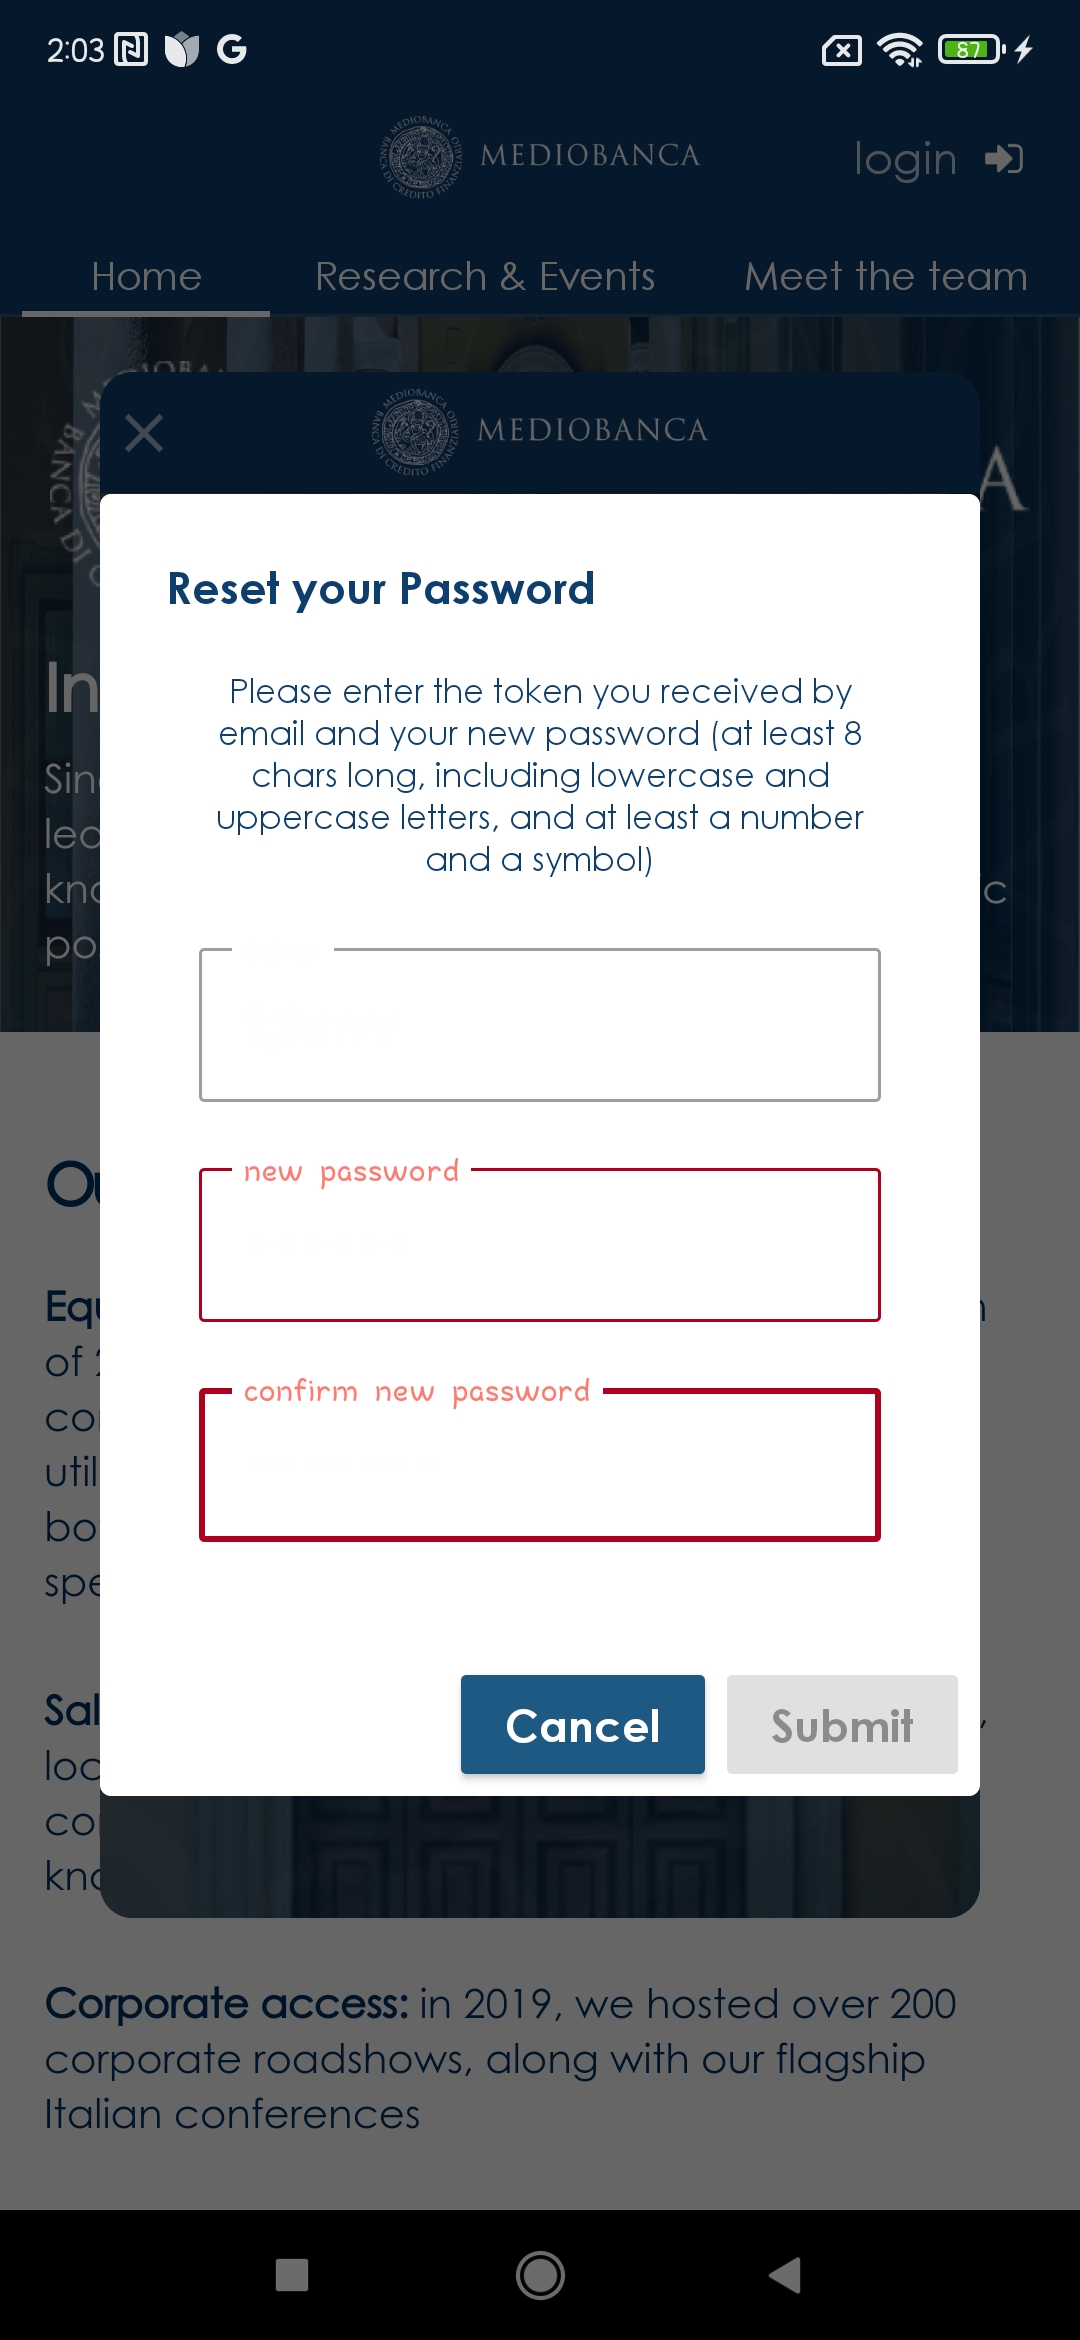 Text in new password field is same color as background